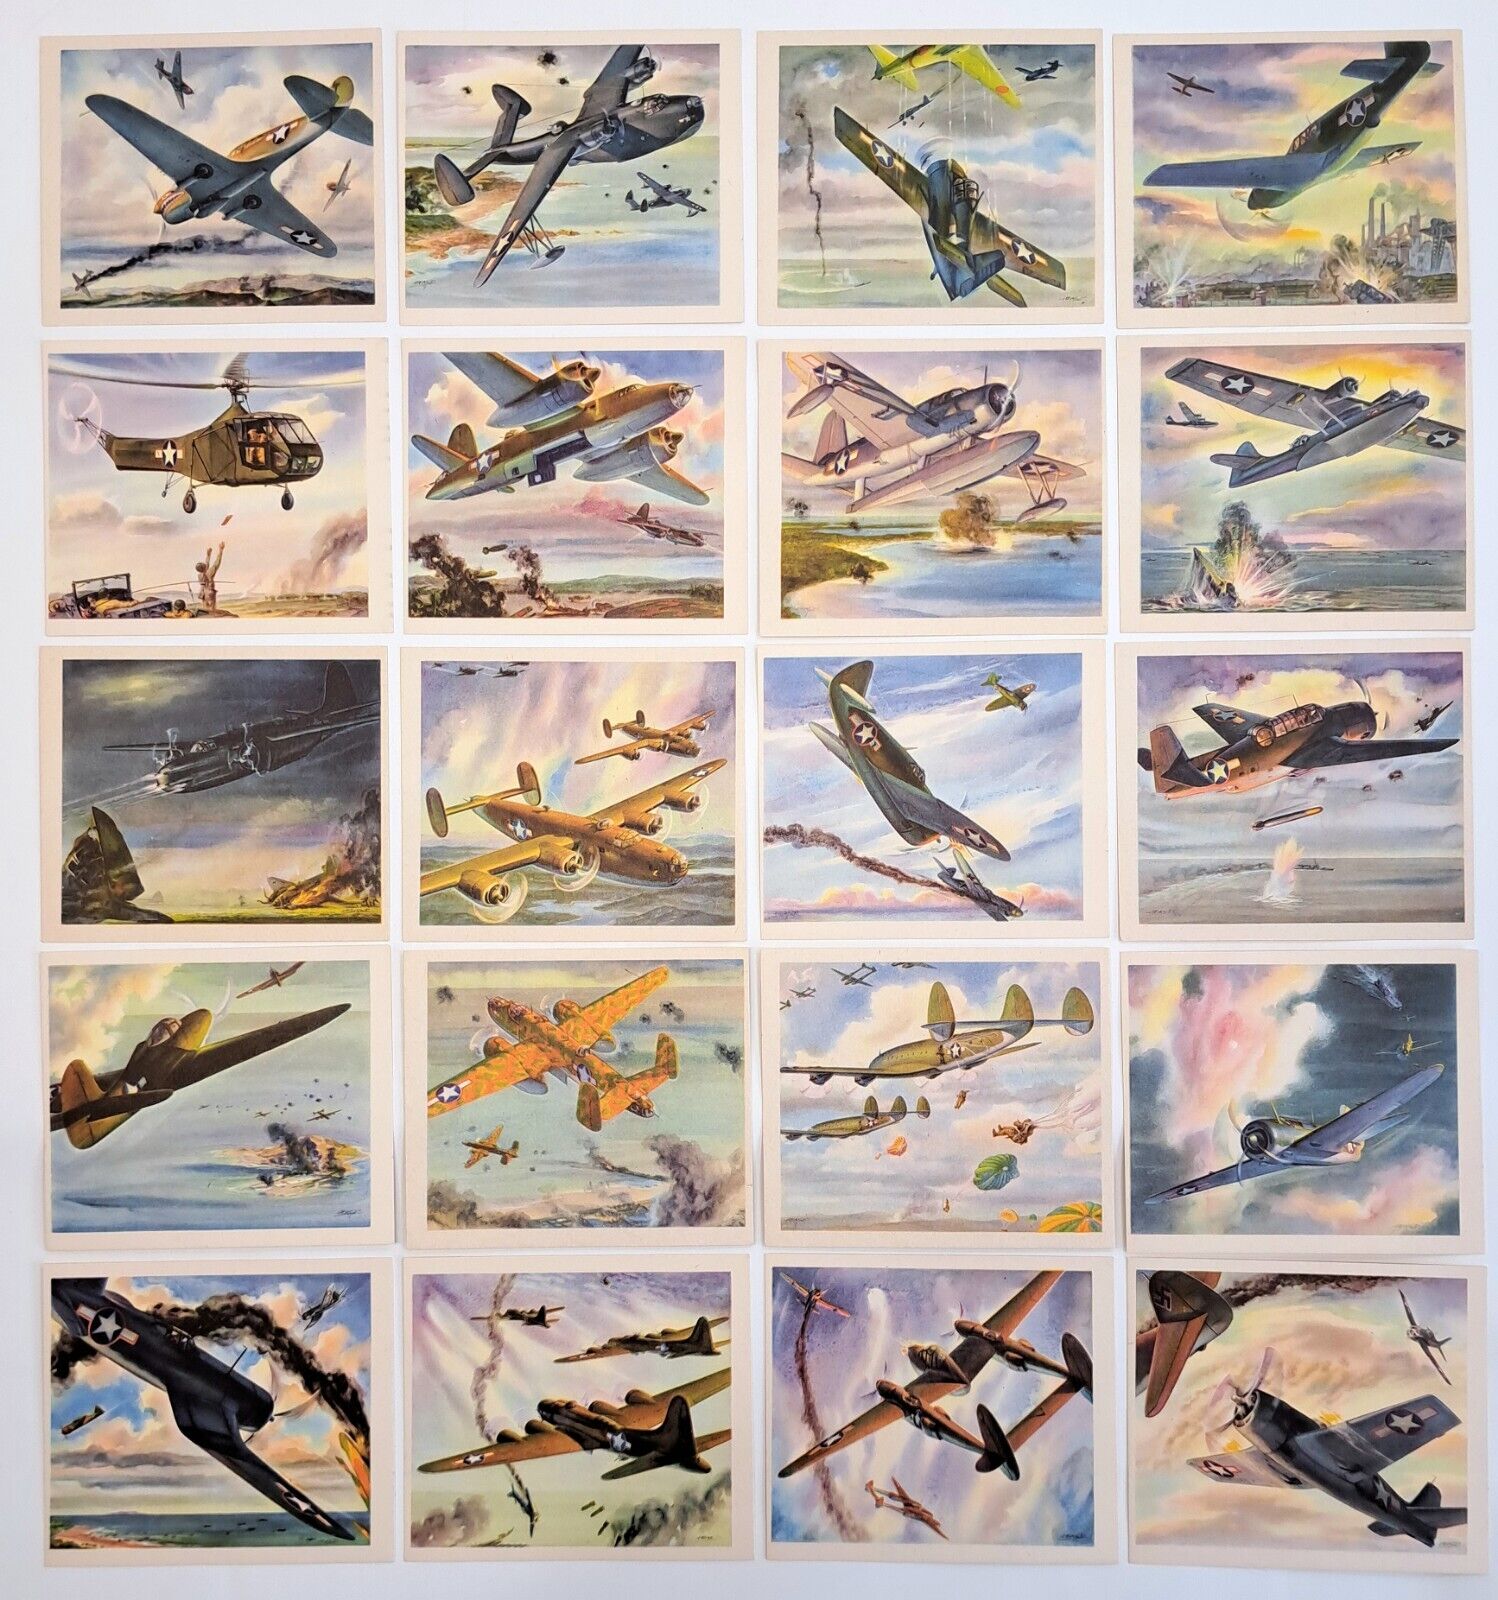 1943 COCA-COLA AMERICA'S FIGHTING PLANES IN ACTION CARD SET 1-20 COMPLETE SET